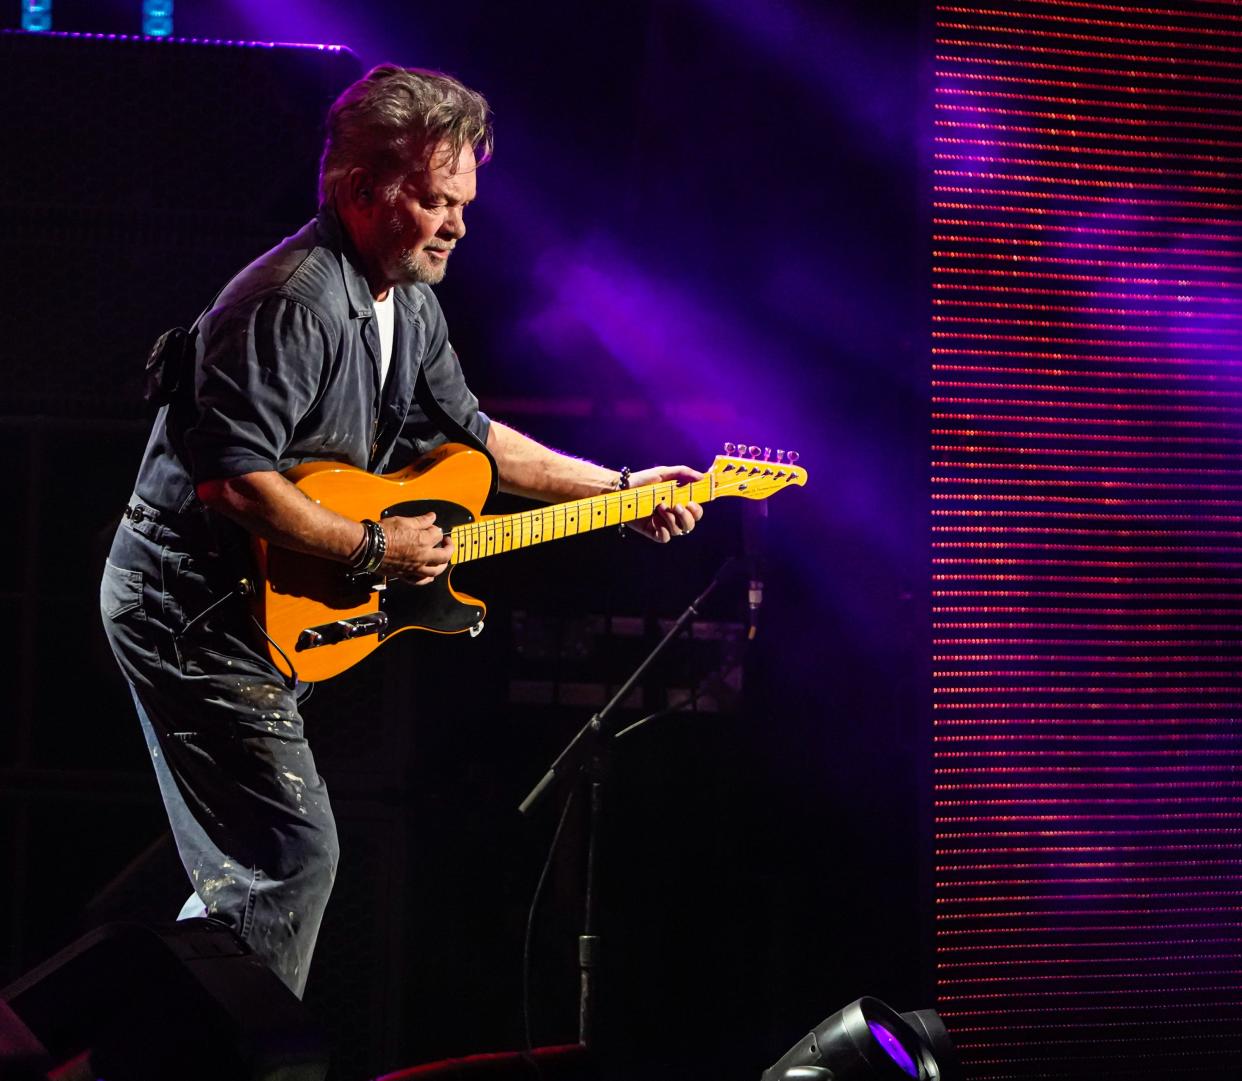 John Mellencamp and band perform at Farm Aid 2023, on Saturday, Sept. 23, 2023, at Ruoff Music Center in Noblesville Ind.